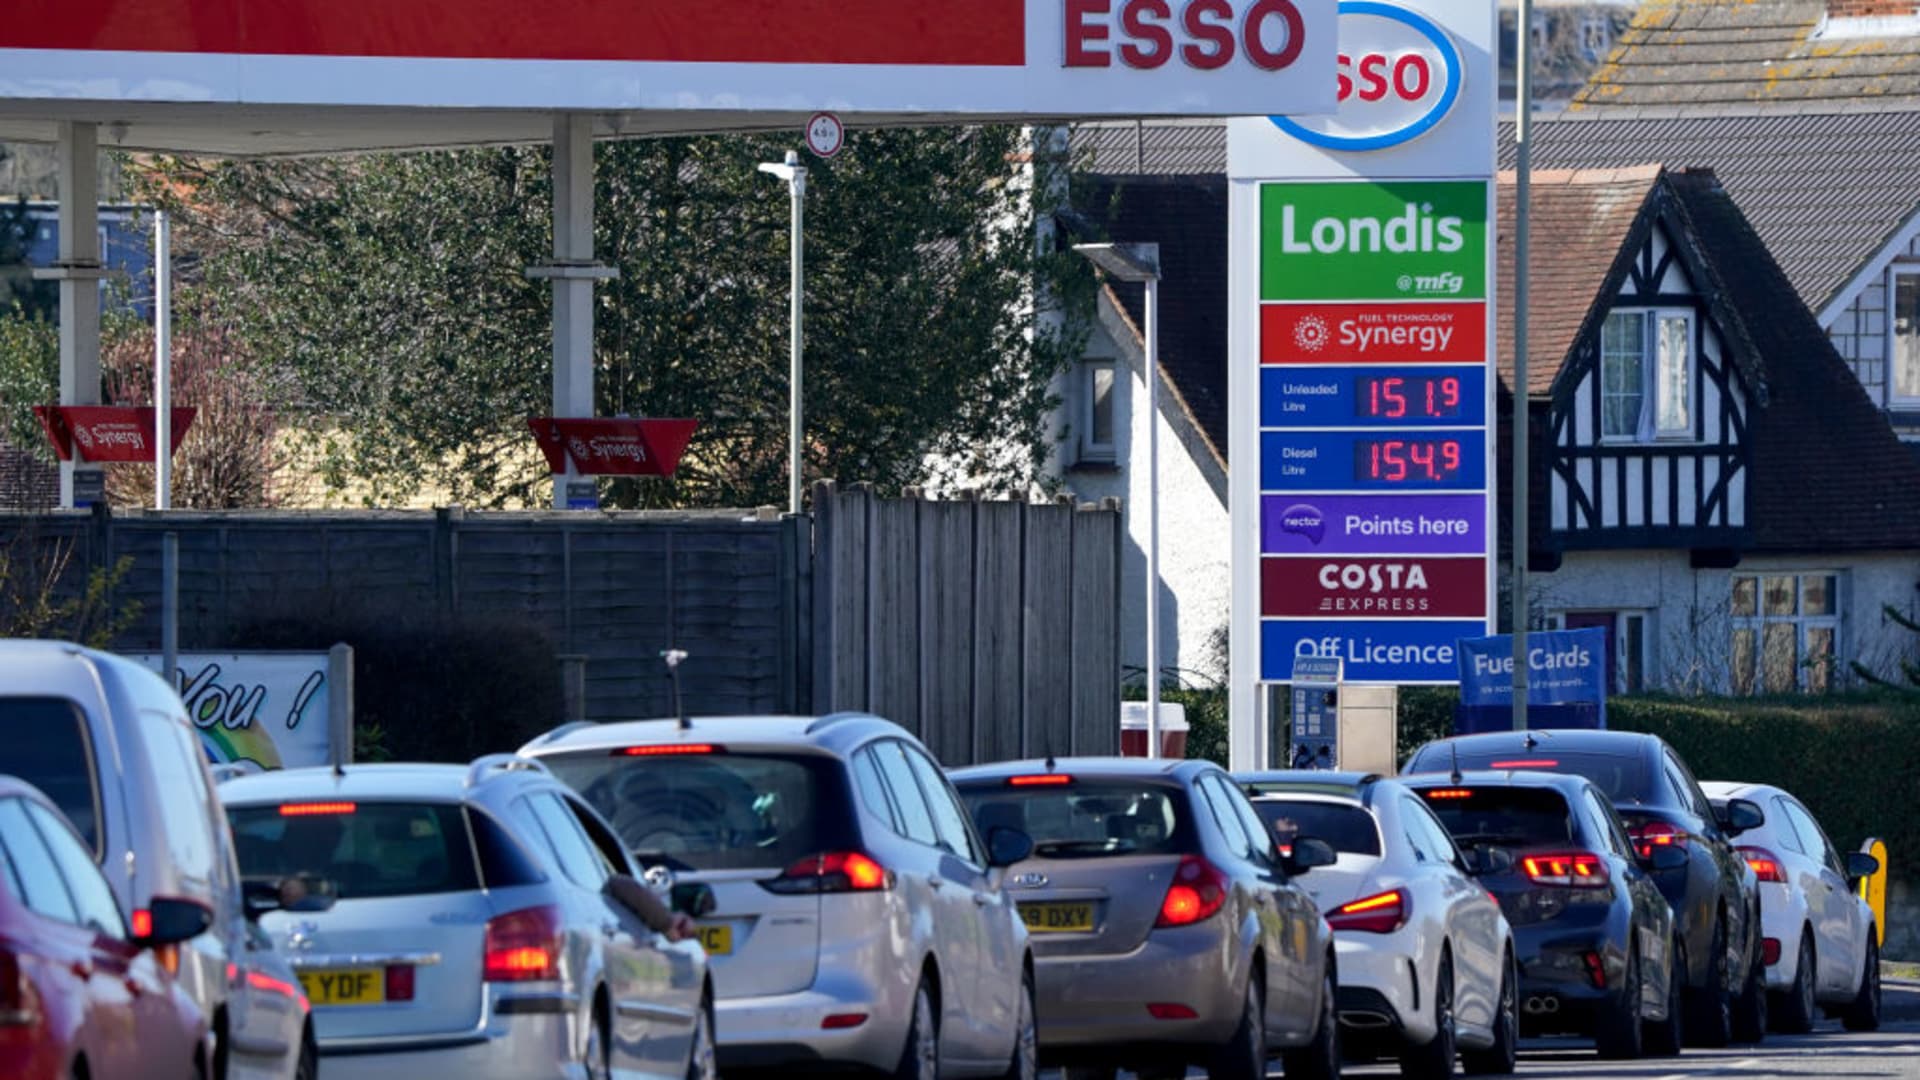 A busy Esso fuel station near Ashford in Kent where petrol is priced at £1.51 per litre.